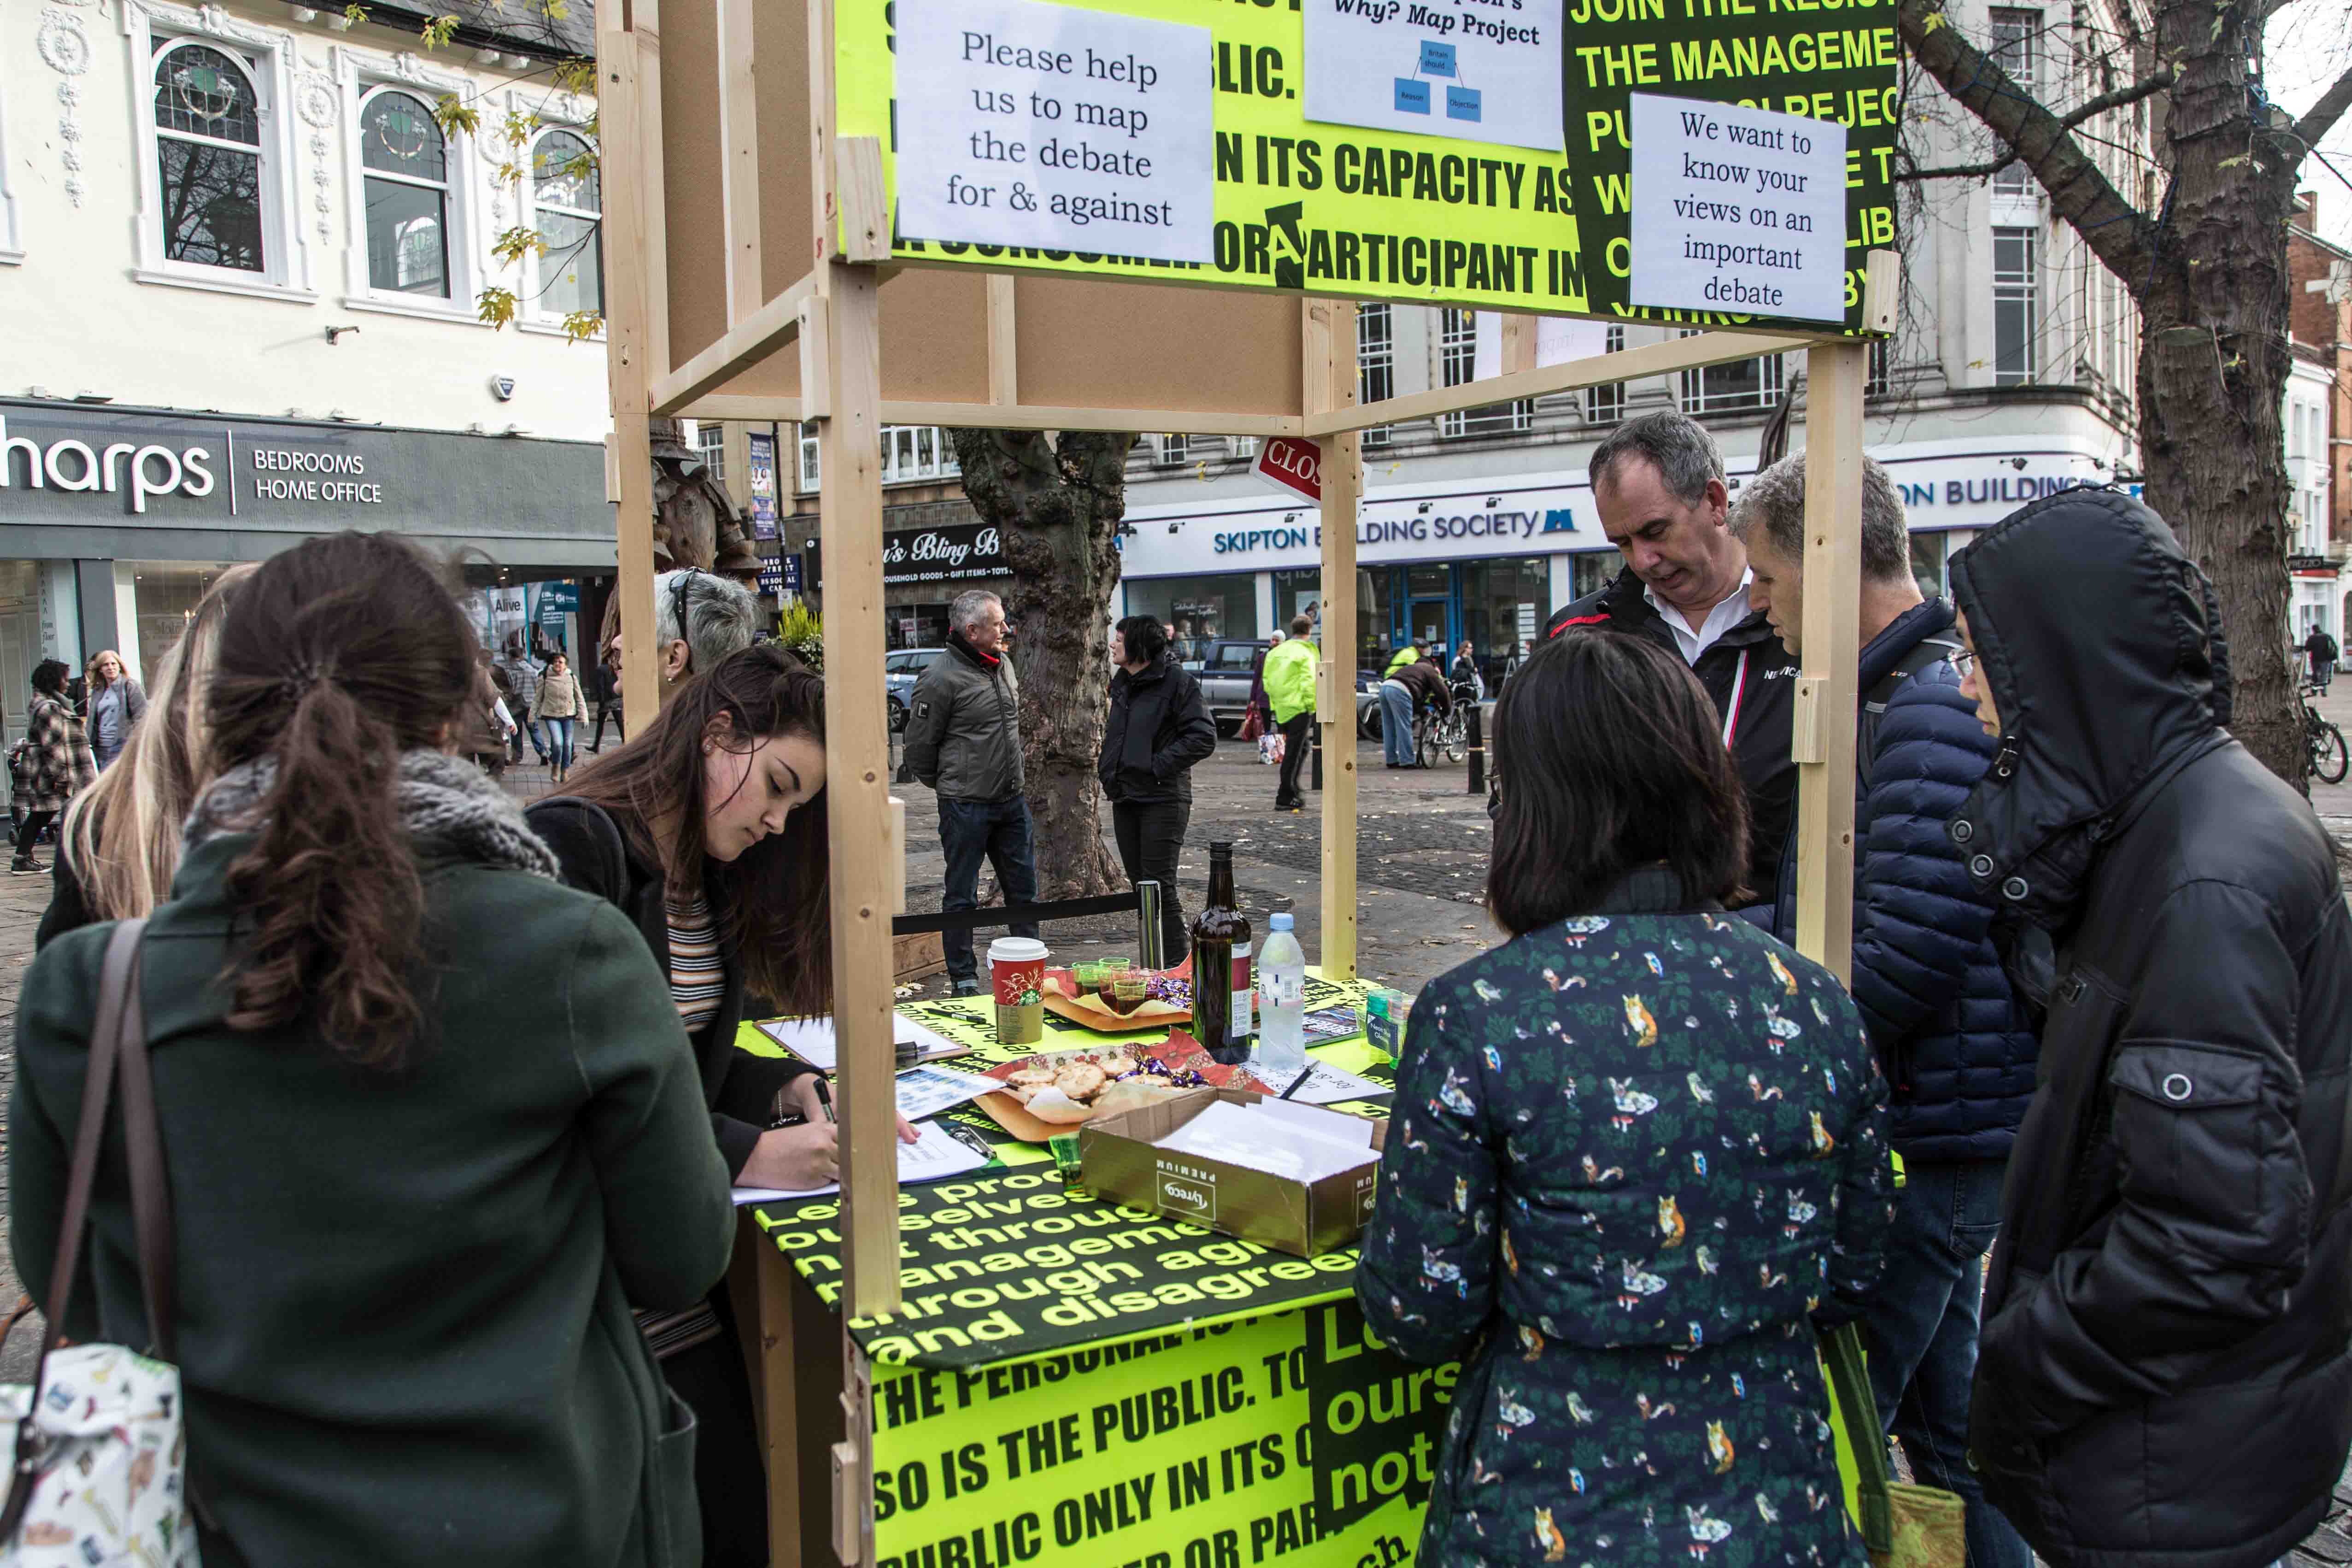 Pictured is the Freee-Carracci-Institute with the Brexit Research Group, Freee Kiosk #2 (open) with the Why?Map, Market Square, Northampton, in collaboration with NN Contemporary. Photographs taken in November 2016 by Joe Brown.